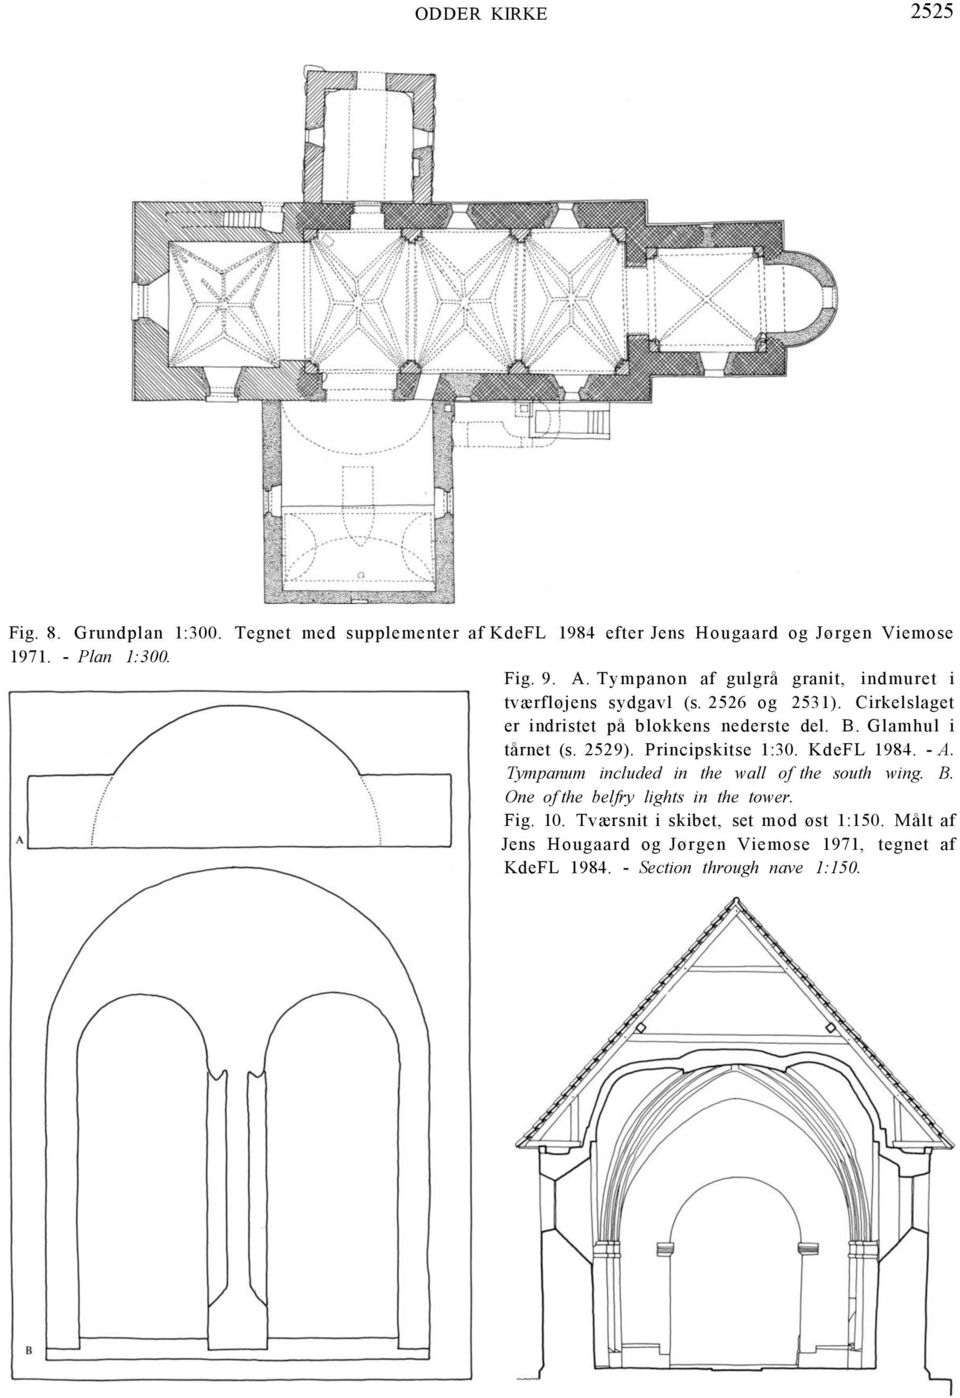 Glamhul i tårnet (s. 2529). Principskitse 1:30. KdeFL 1984. - A. Tympanum included in the wall of the south wing. B.